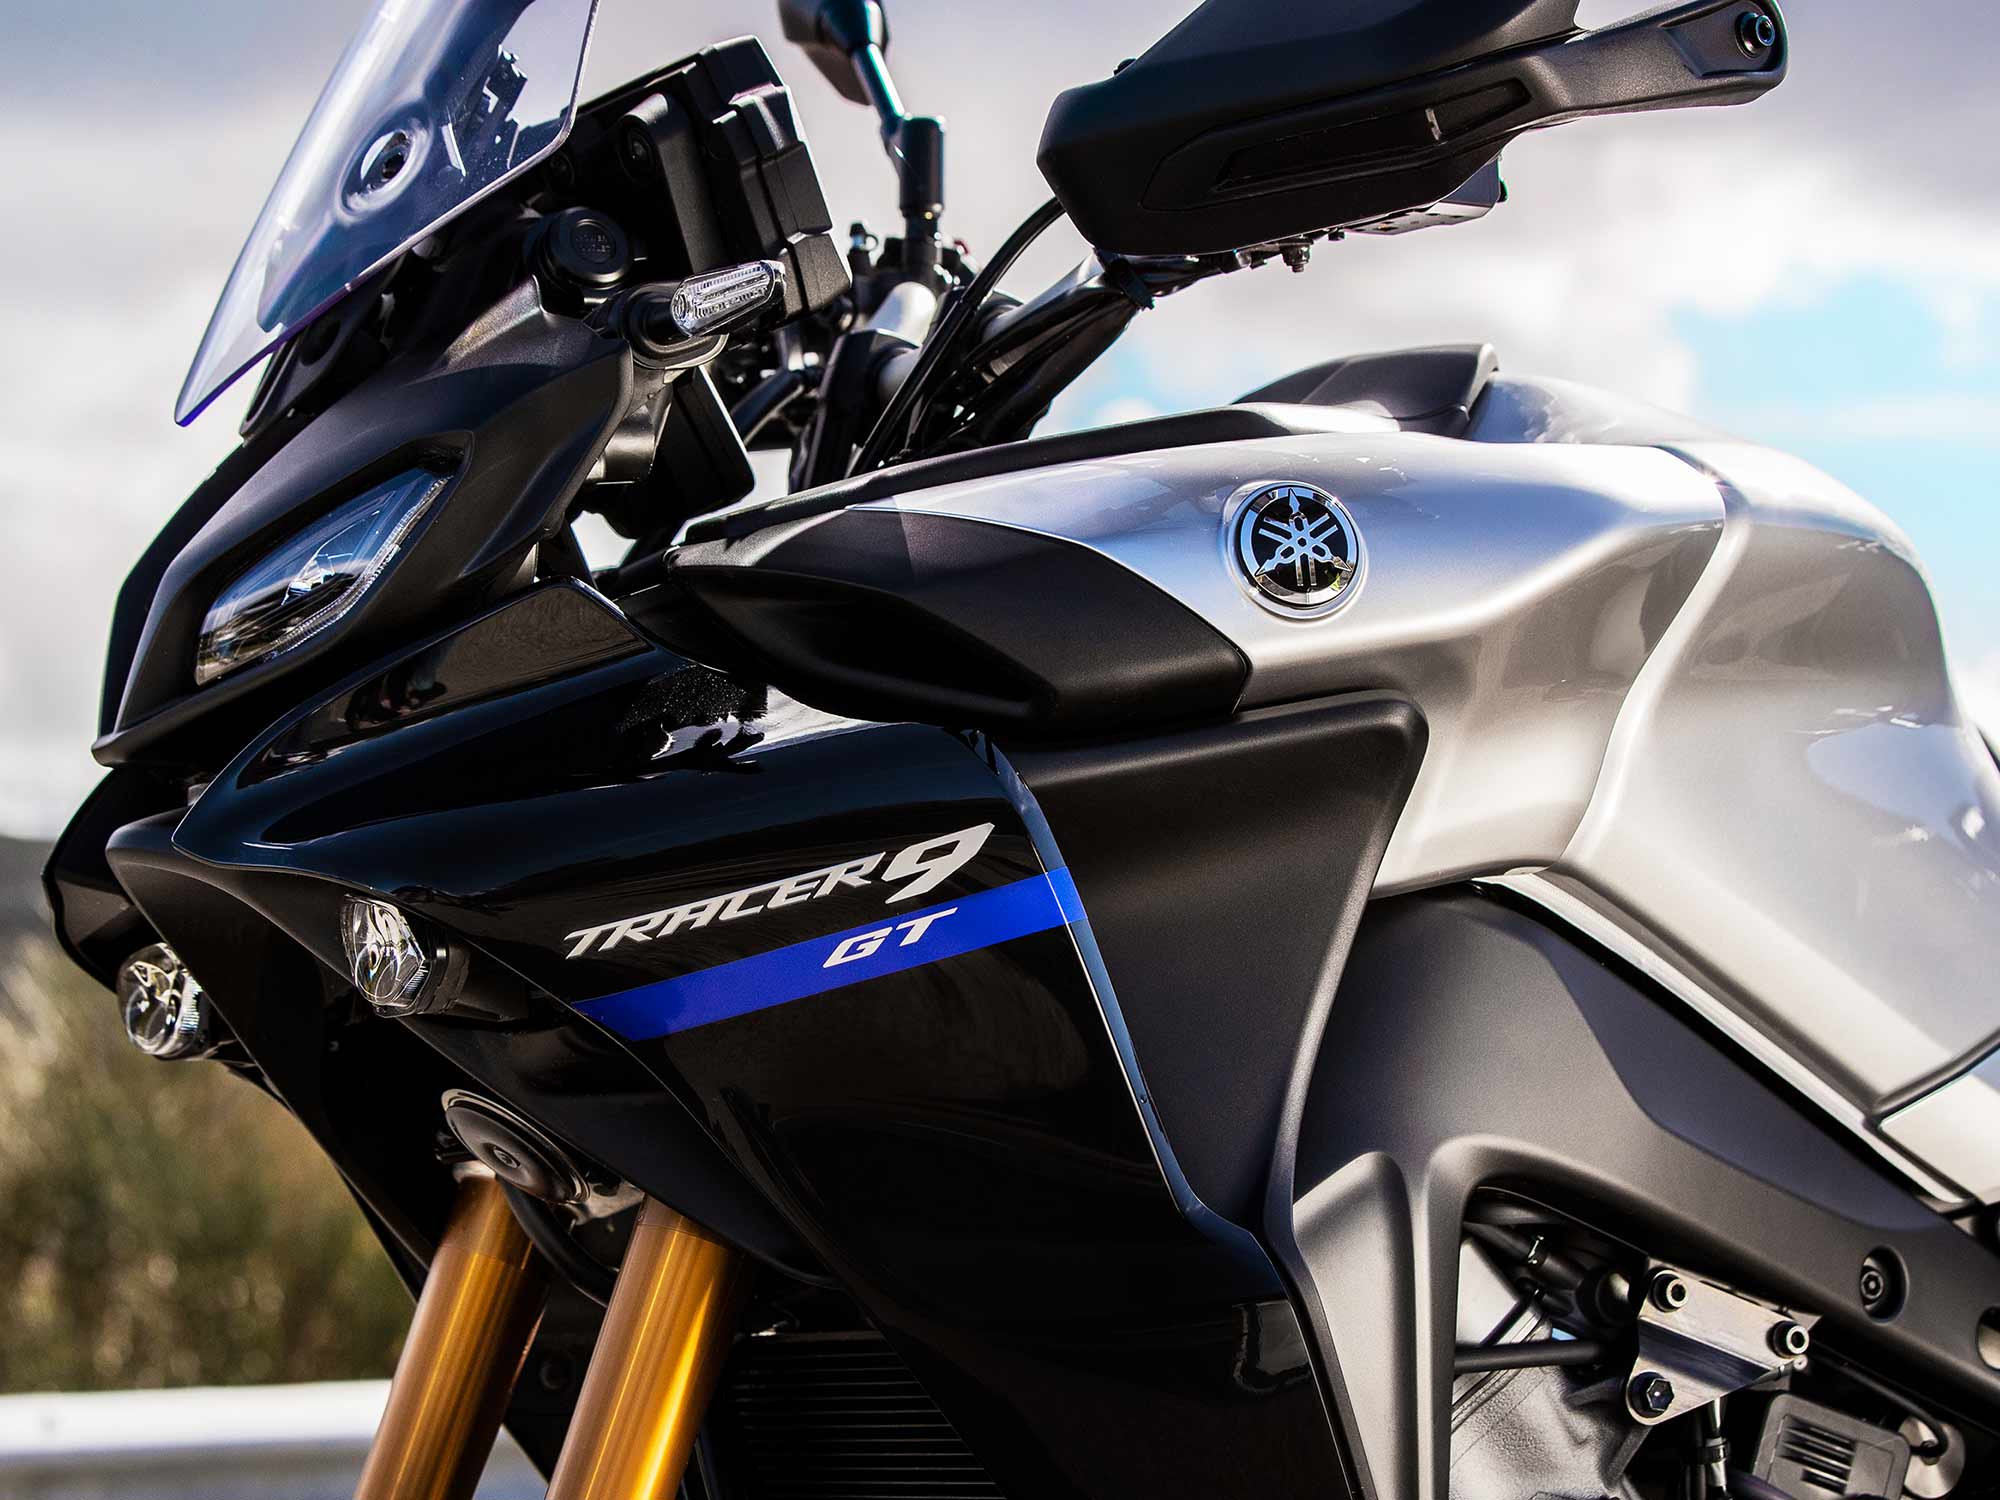 2022 Yamaha Tracer 9 GT Buyer's Guide: Specs, Photos, Price